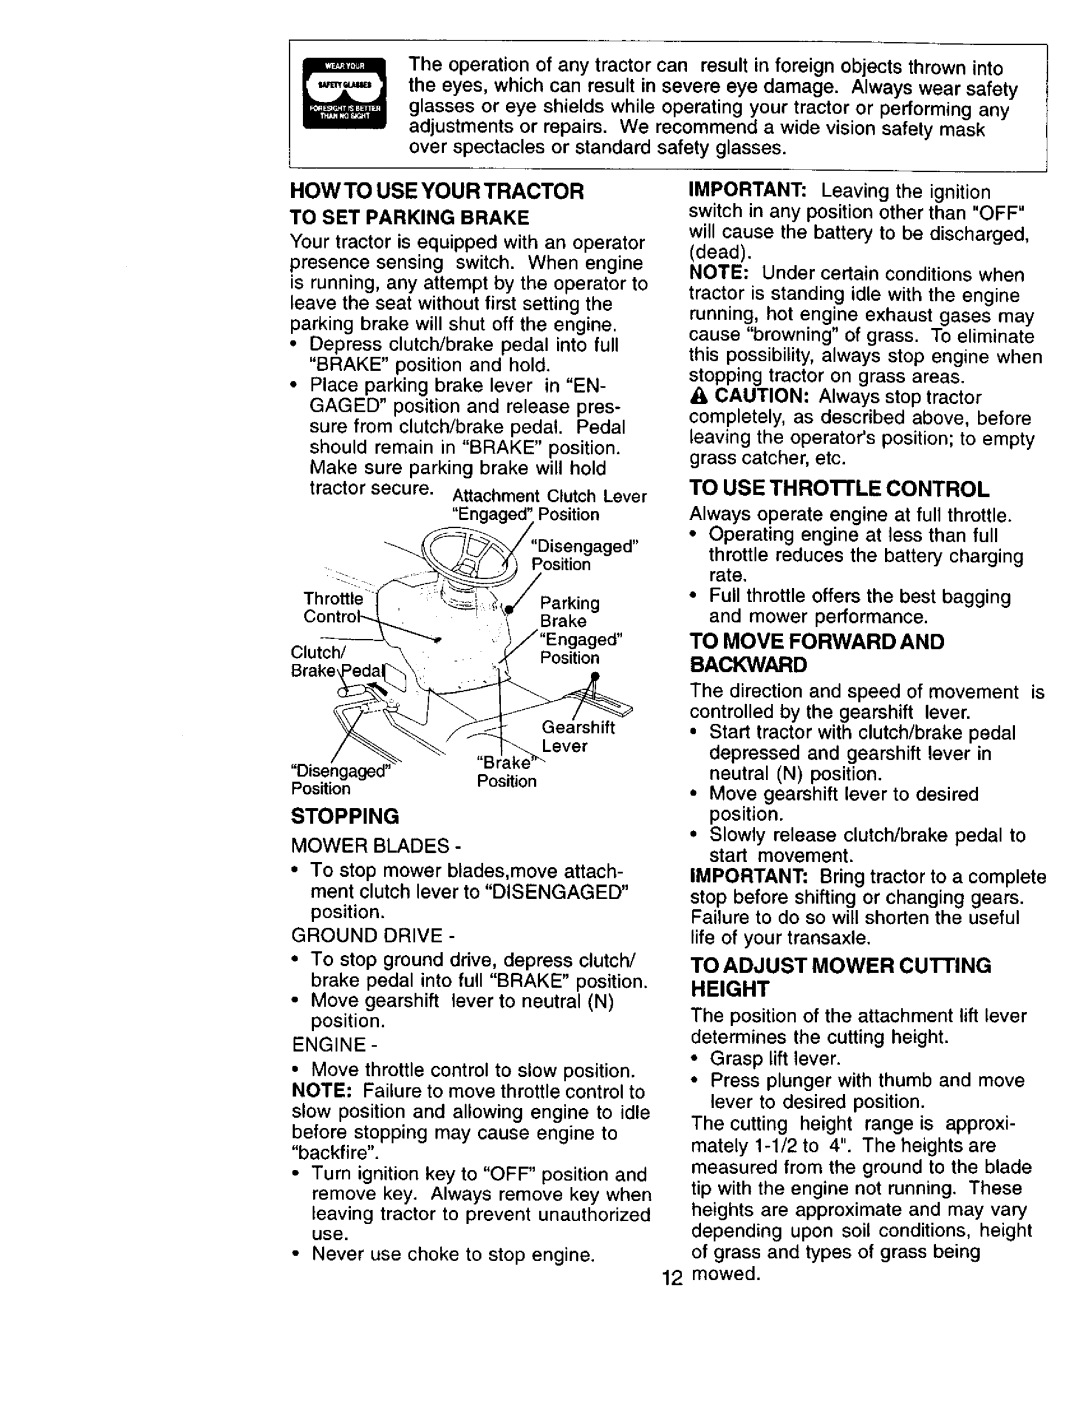 Sears 917.271051 owner manual How To Use Your Tractor, Stopping 